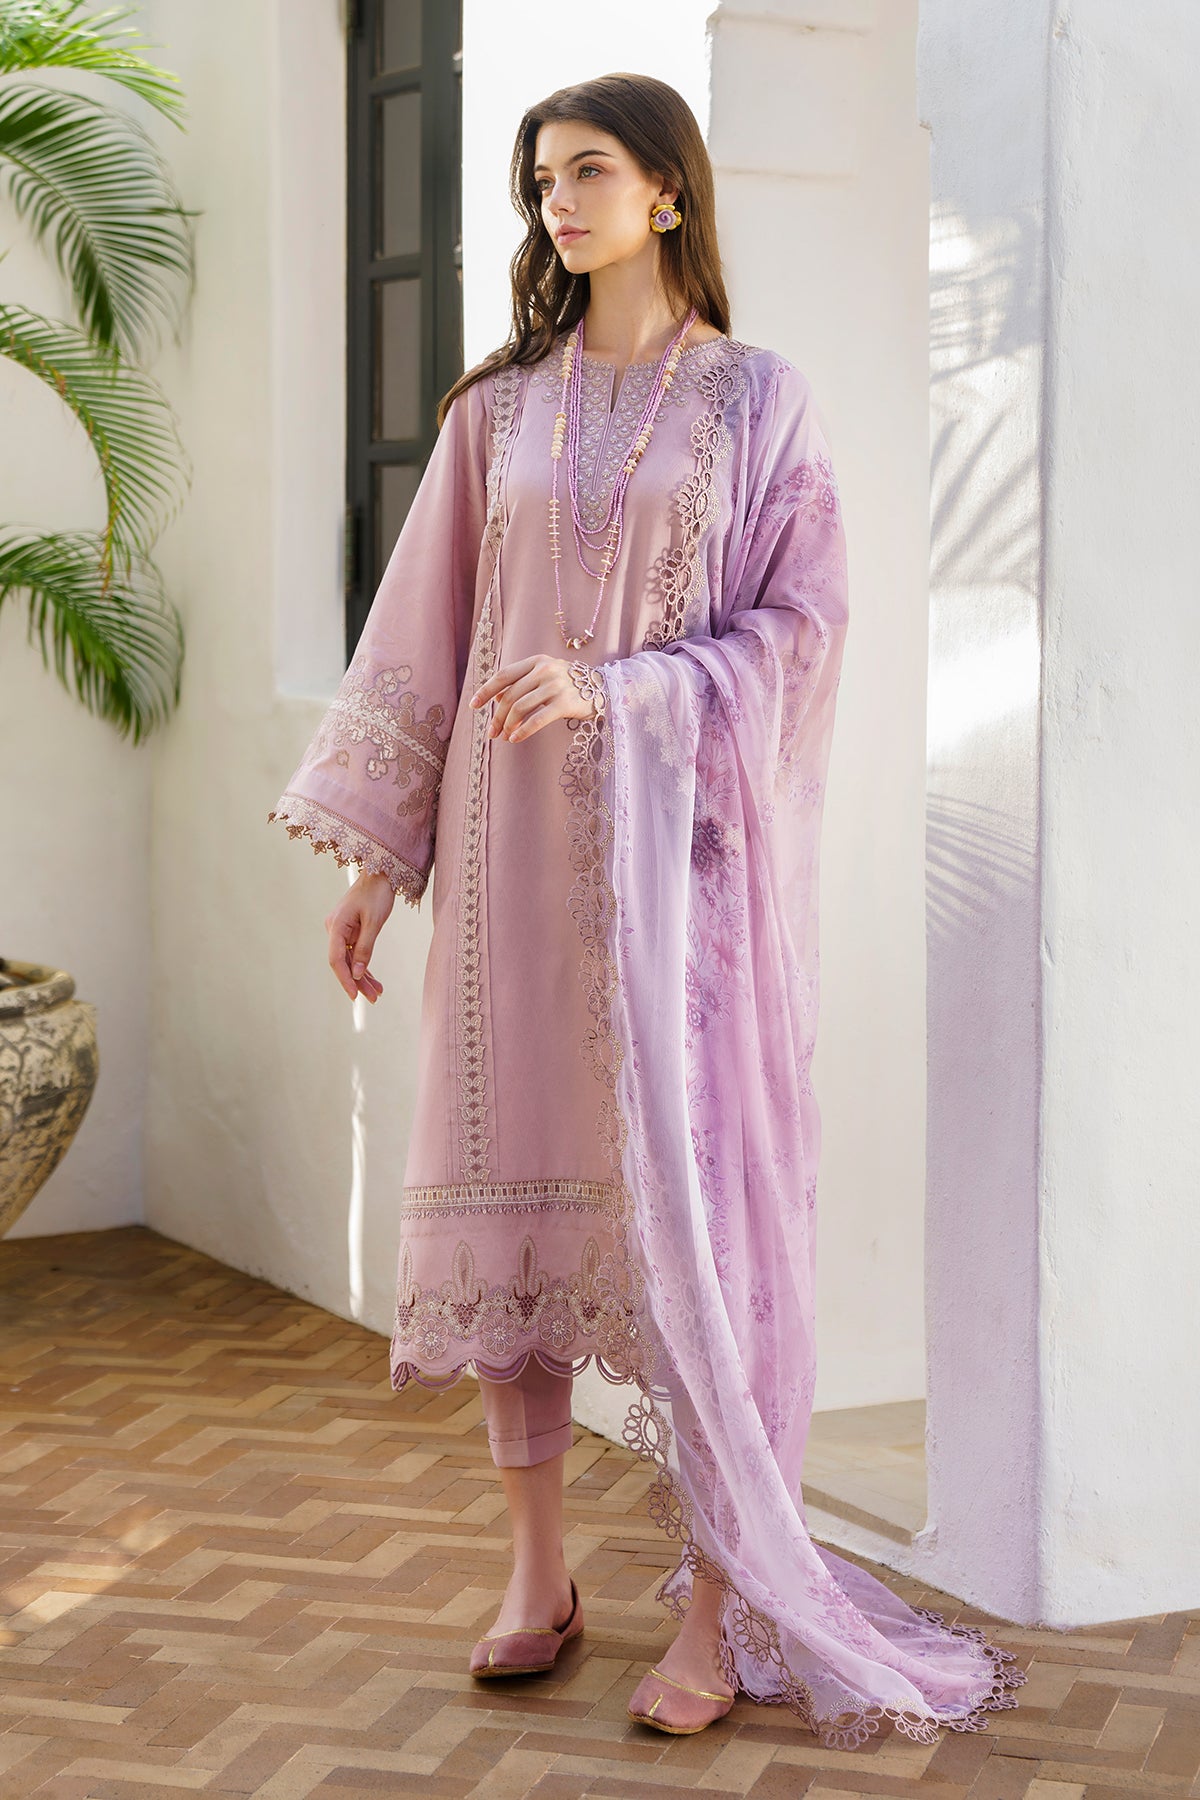 EMBROIDERED JACQUARD LAWN UF-581